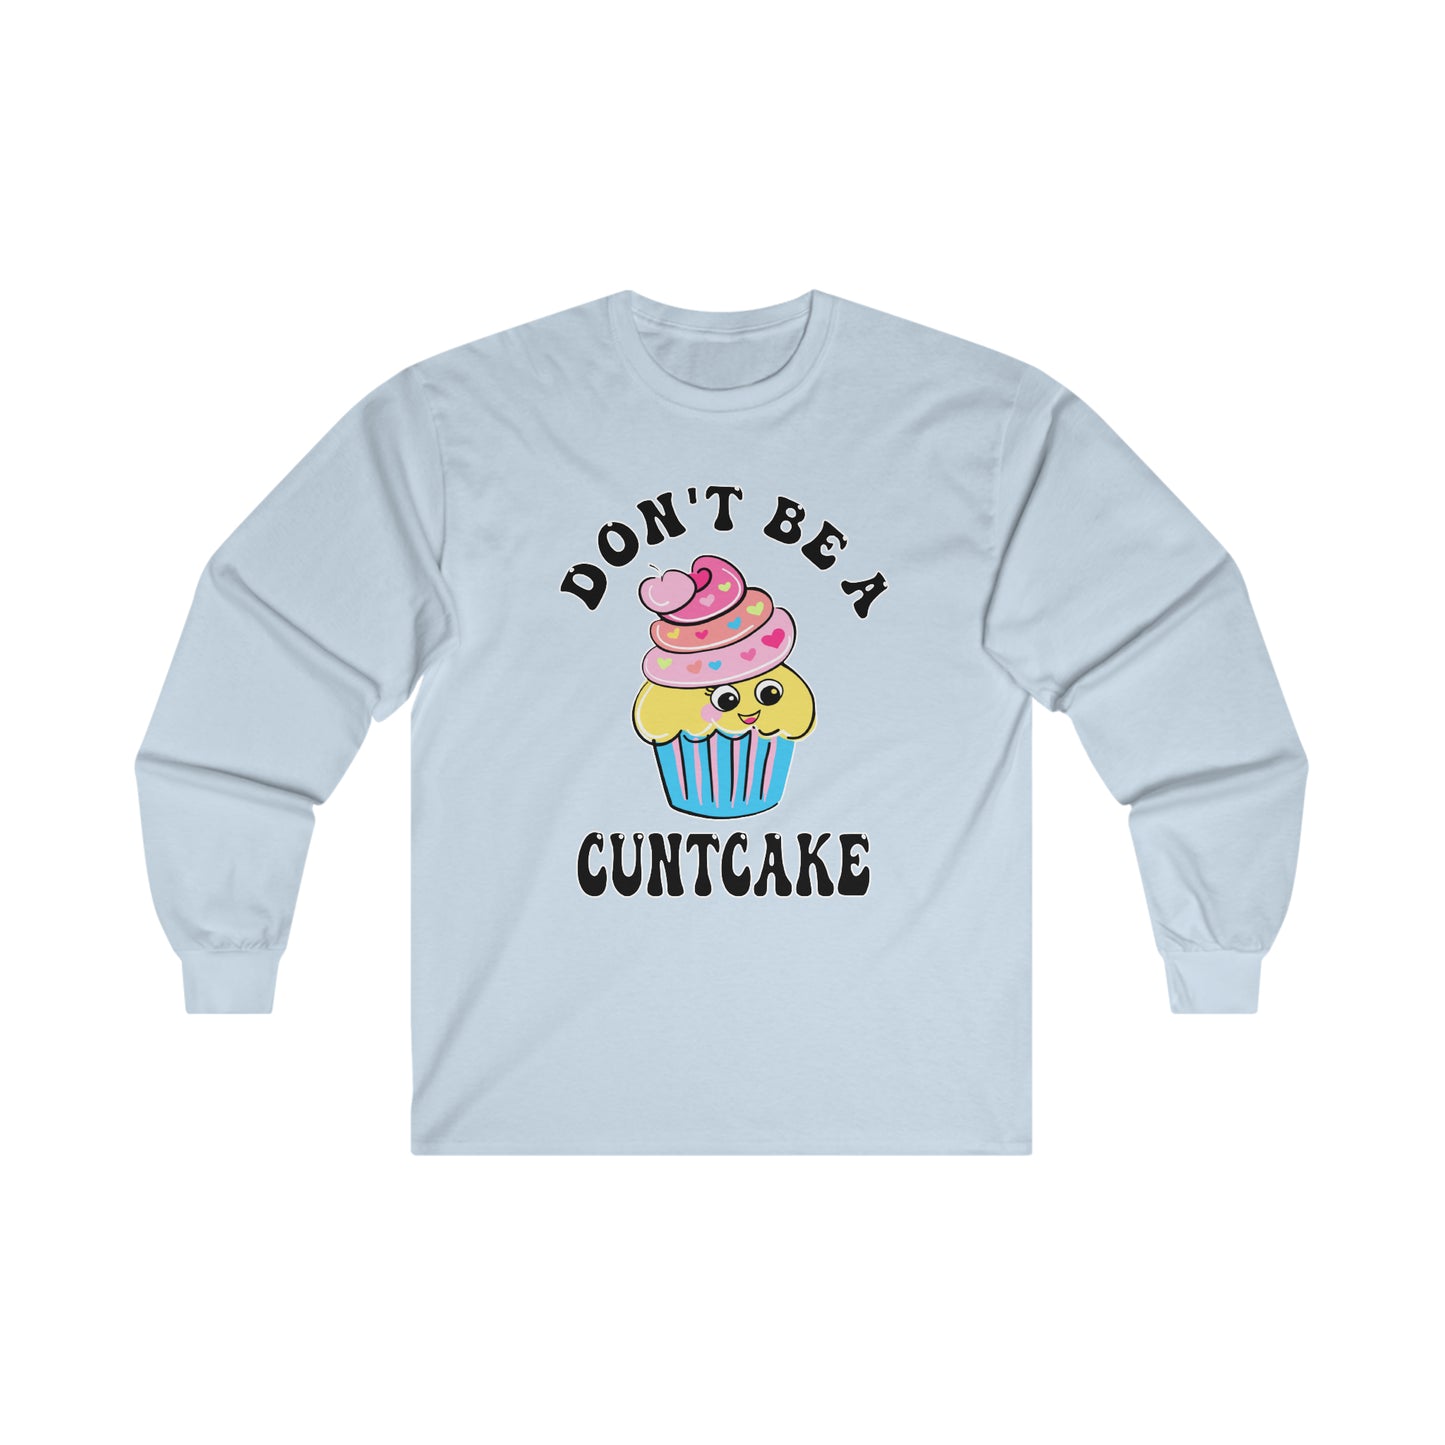 Don't Be A Cuntcake: Ultra Cotton Long Sleeve Tee